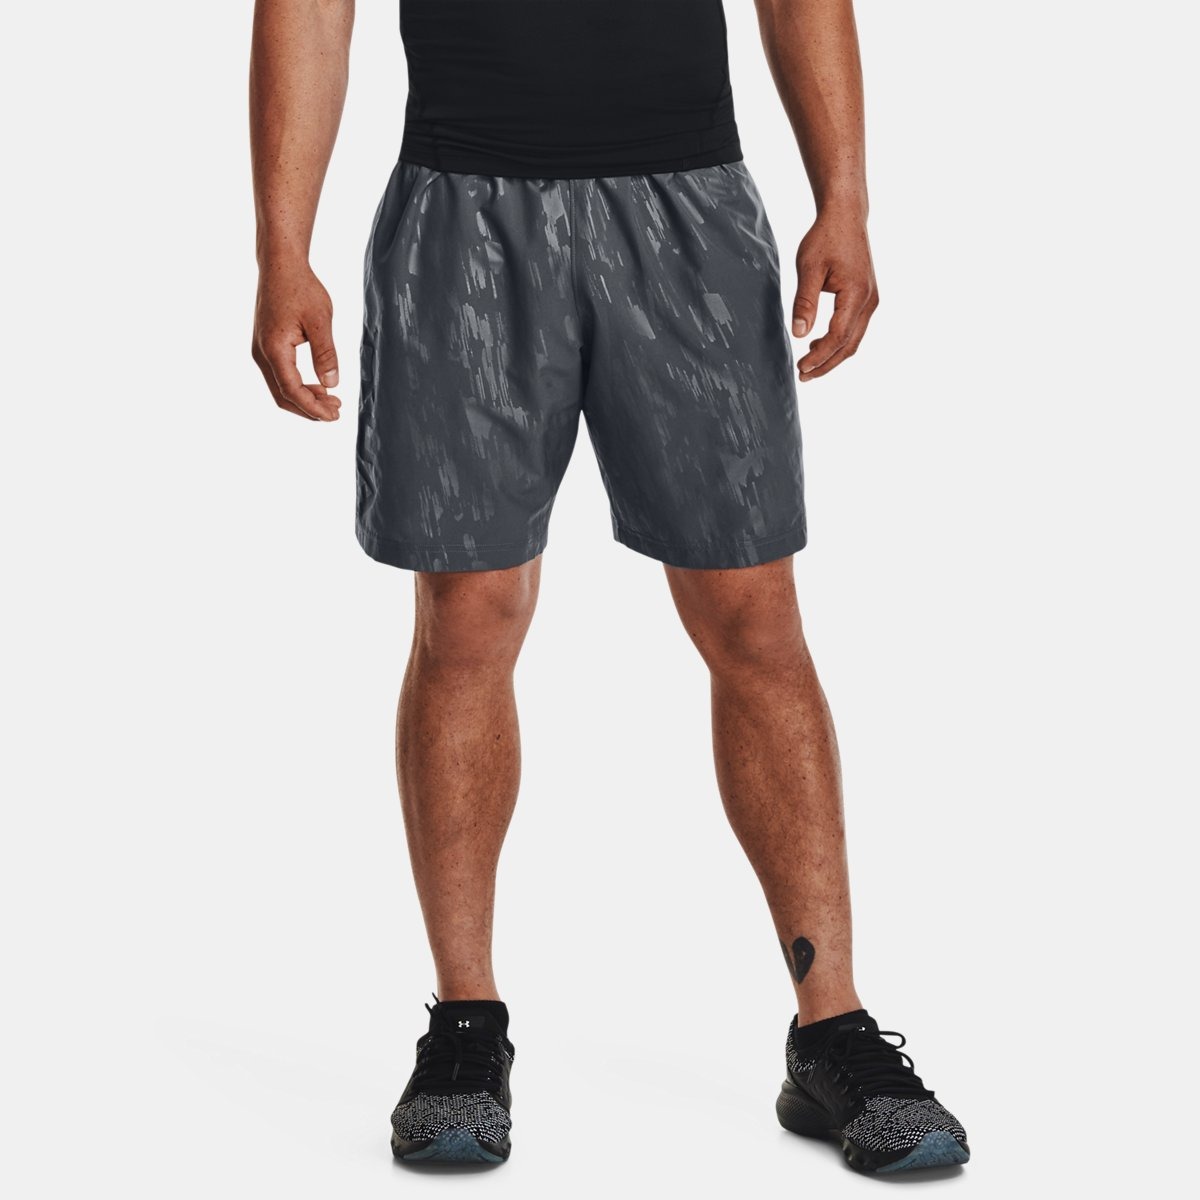 Shorts in Grey for Man by Under Armour GOOFASH